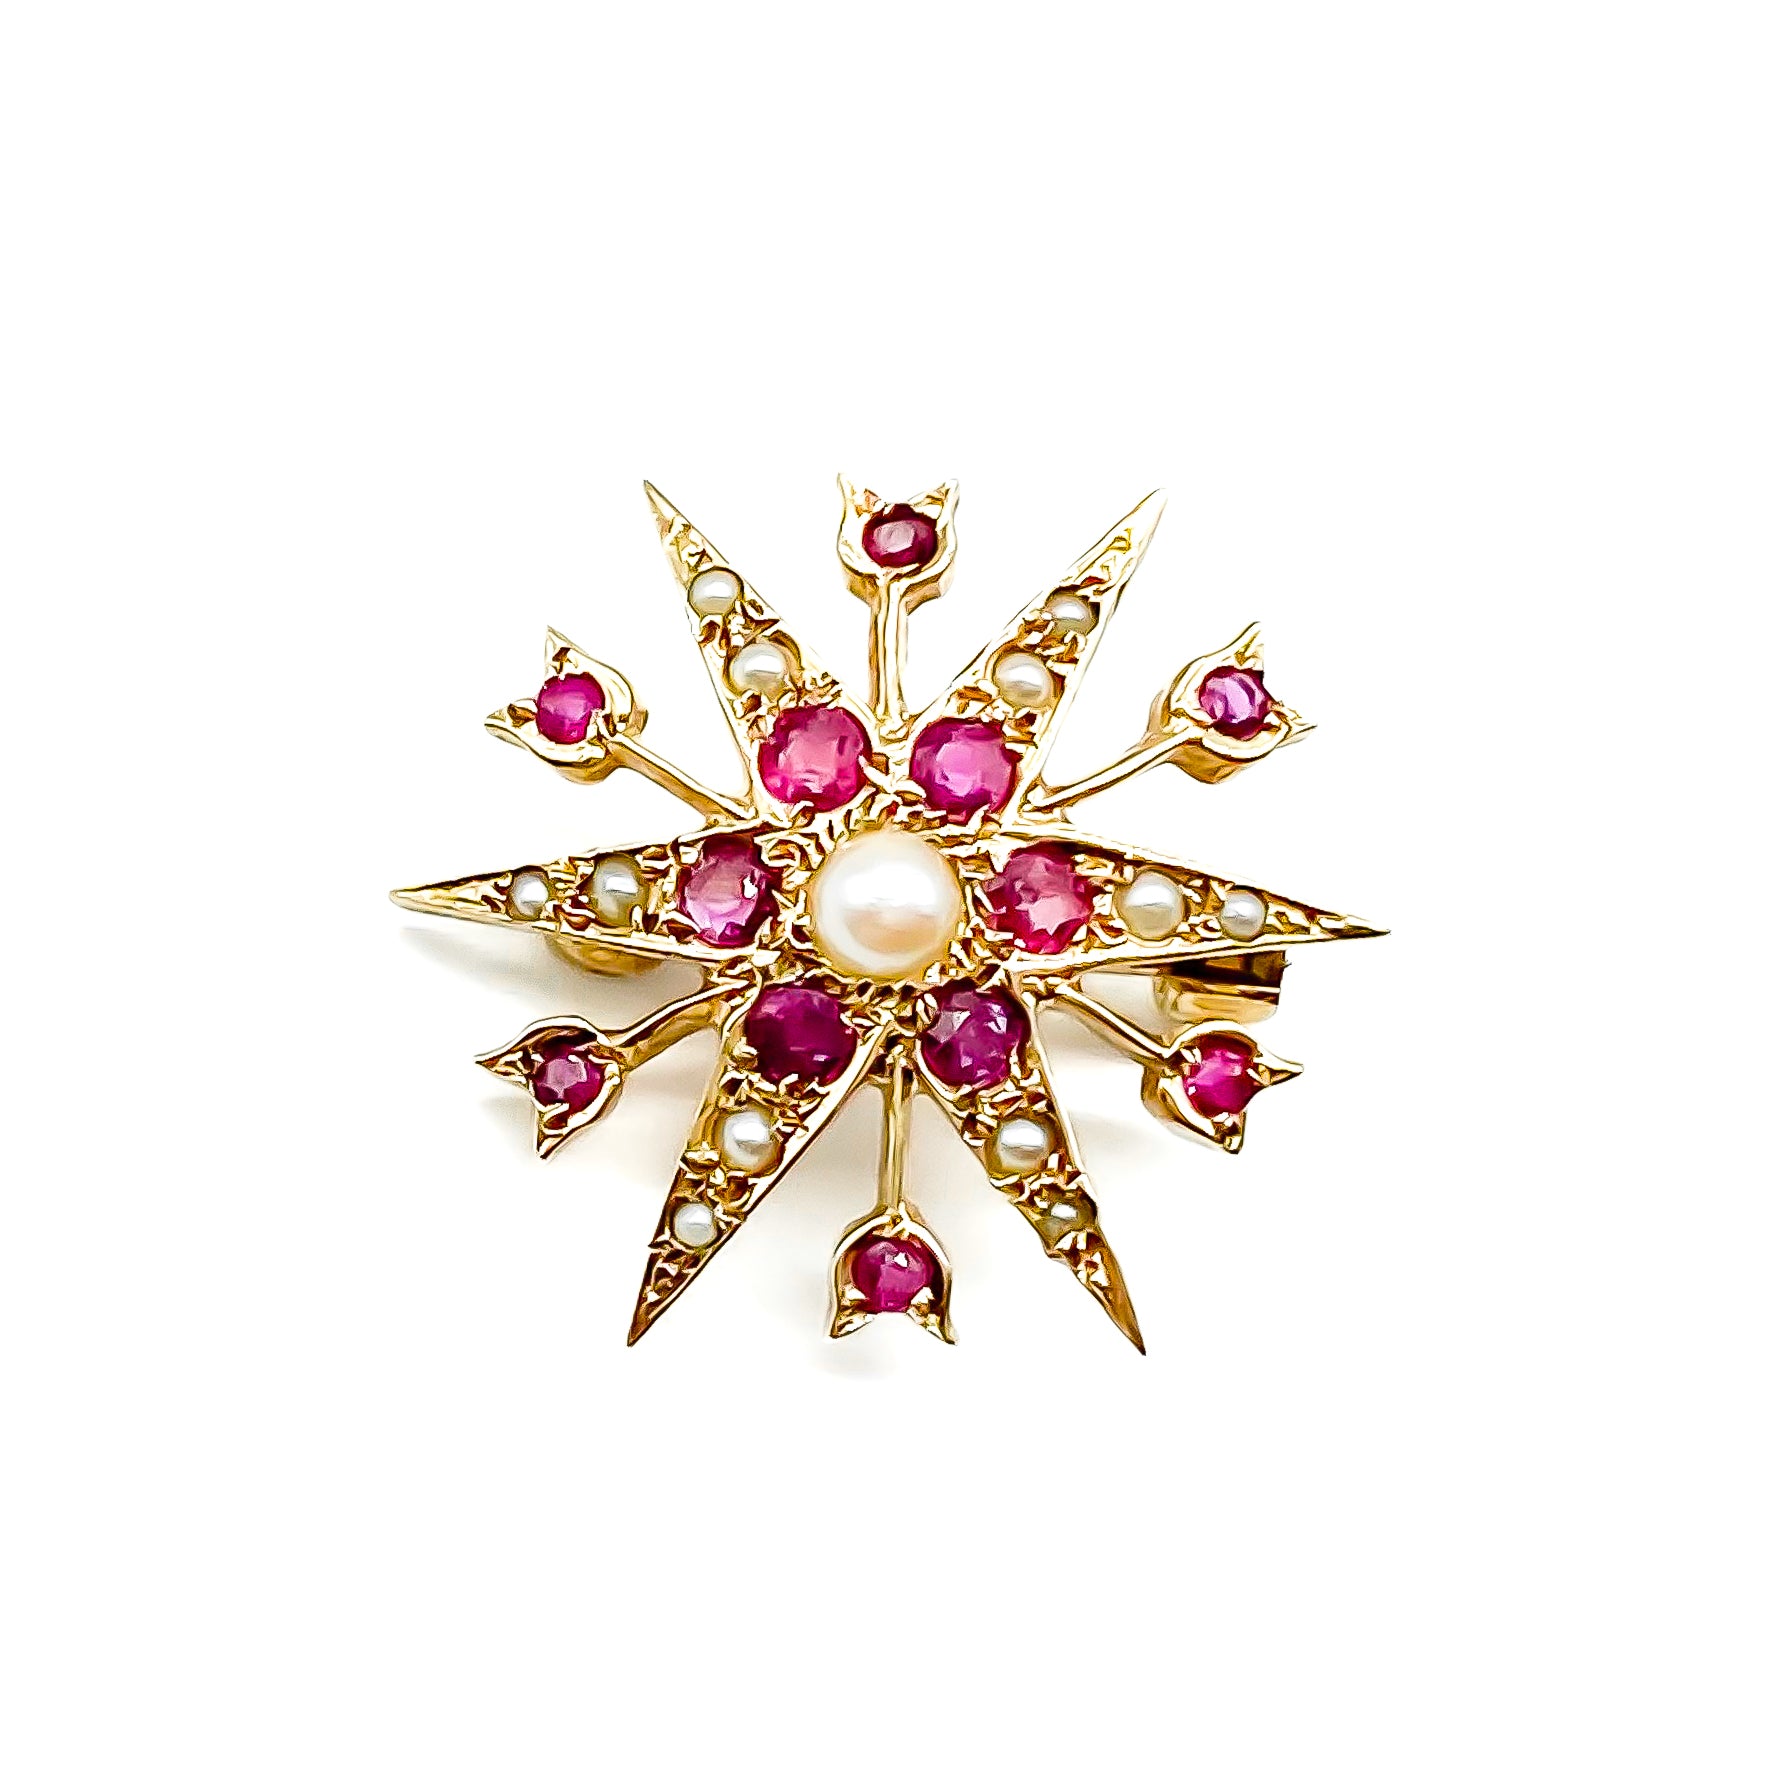 Delicate Victorian 9ct yellow gold star brooch set with twelve faceted rubies and seed pearls. 